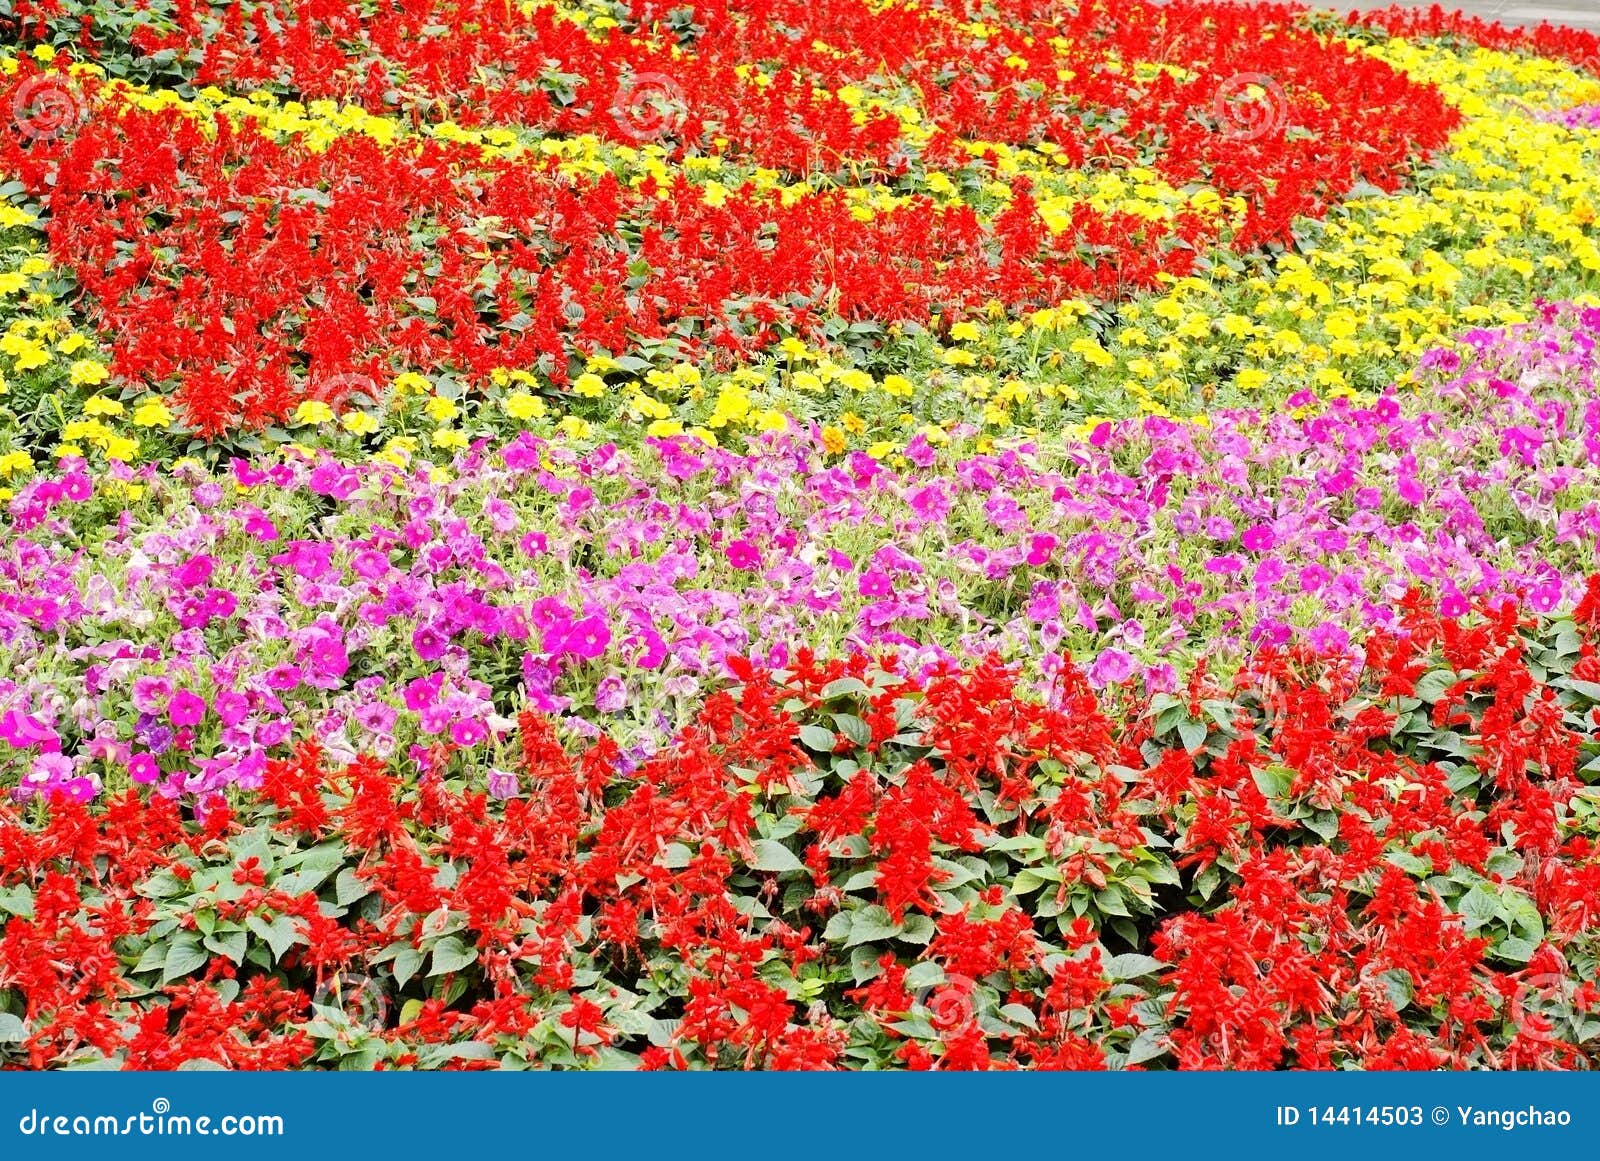 Flower bed stock image. Image of plants, flowers, flower - 14414503